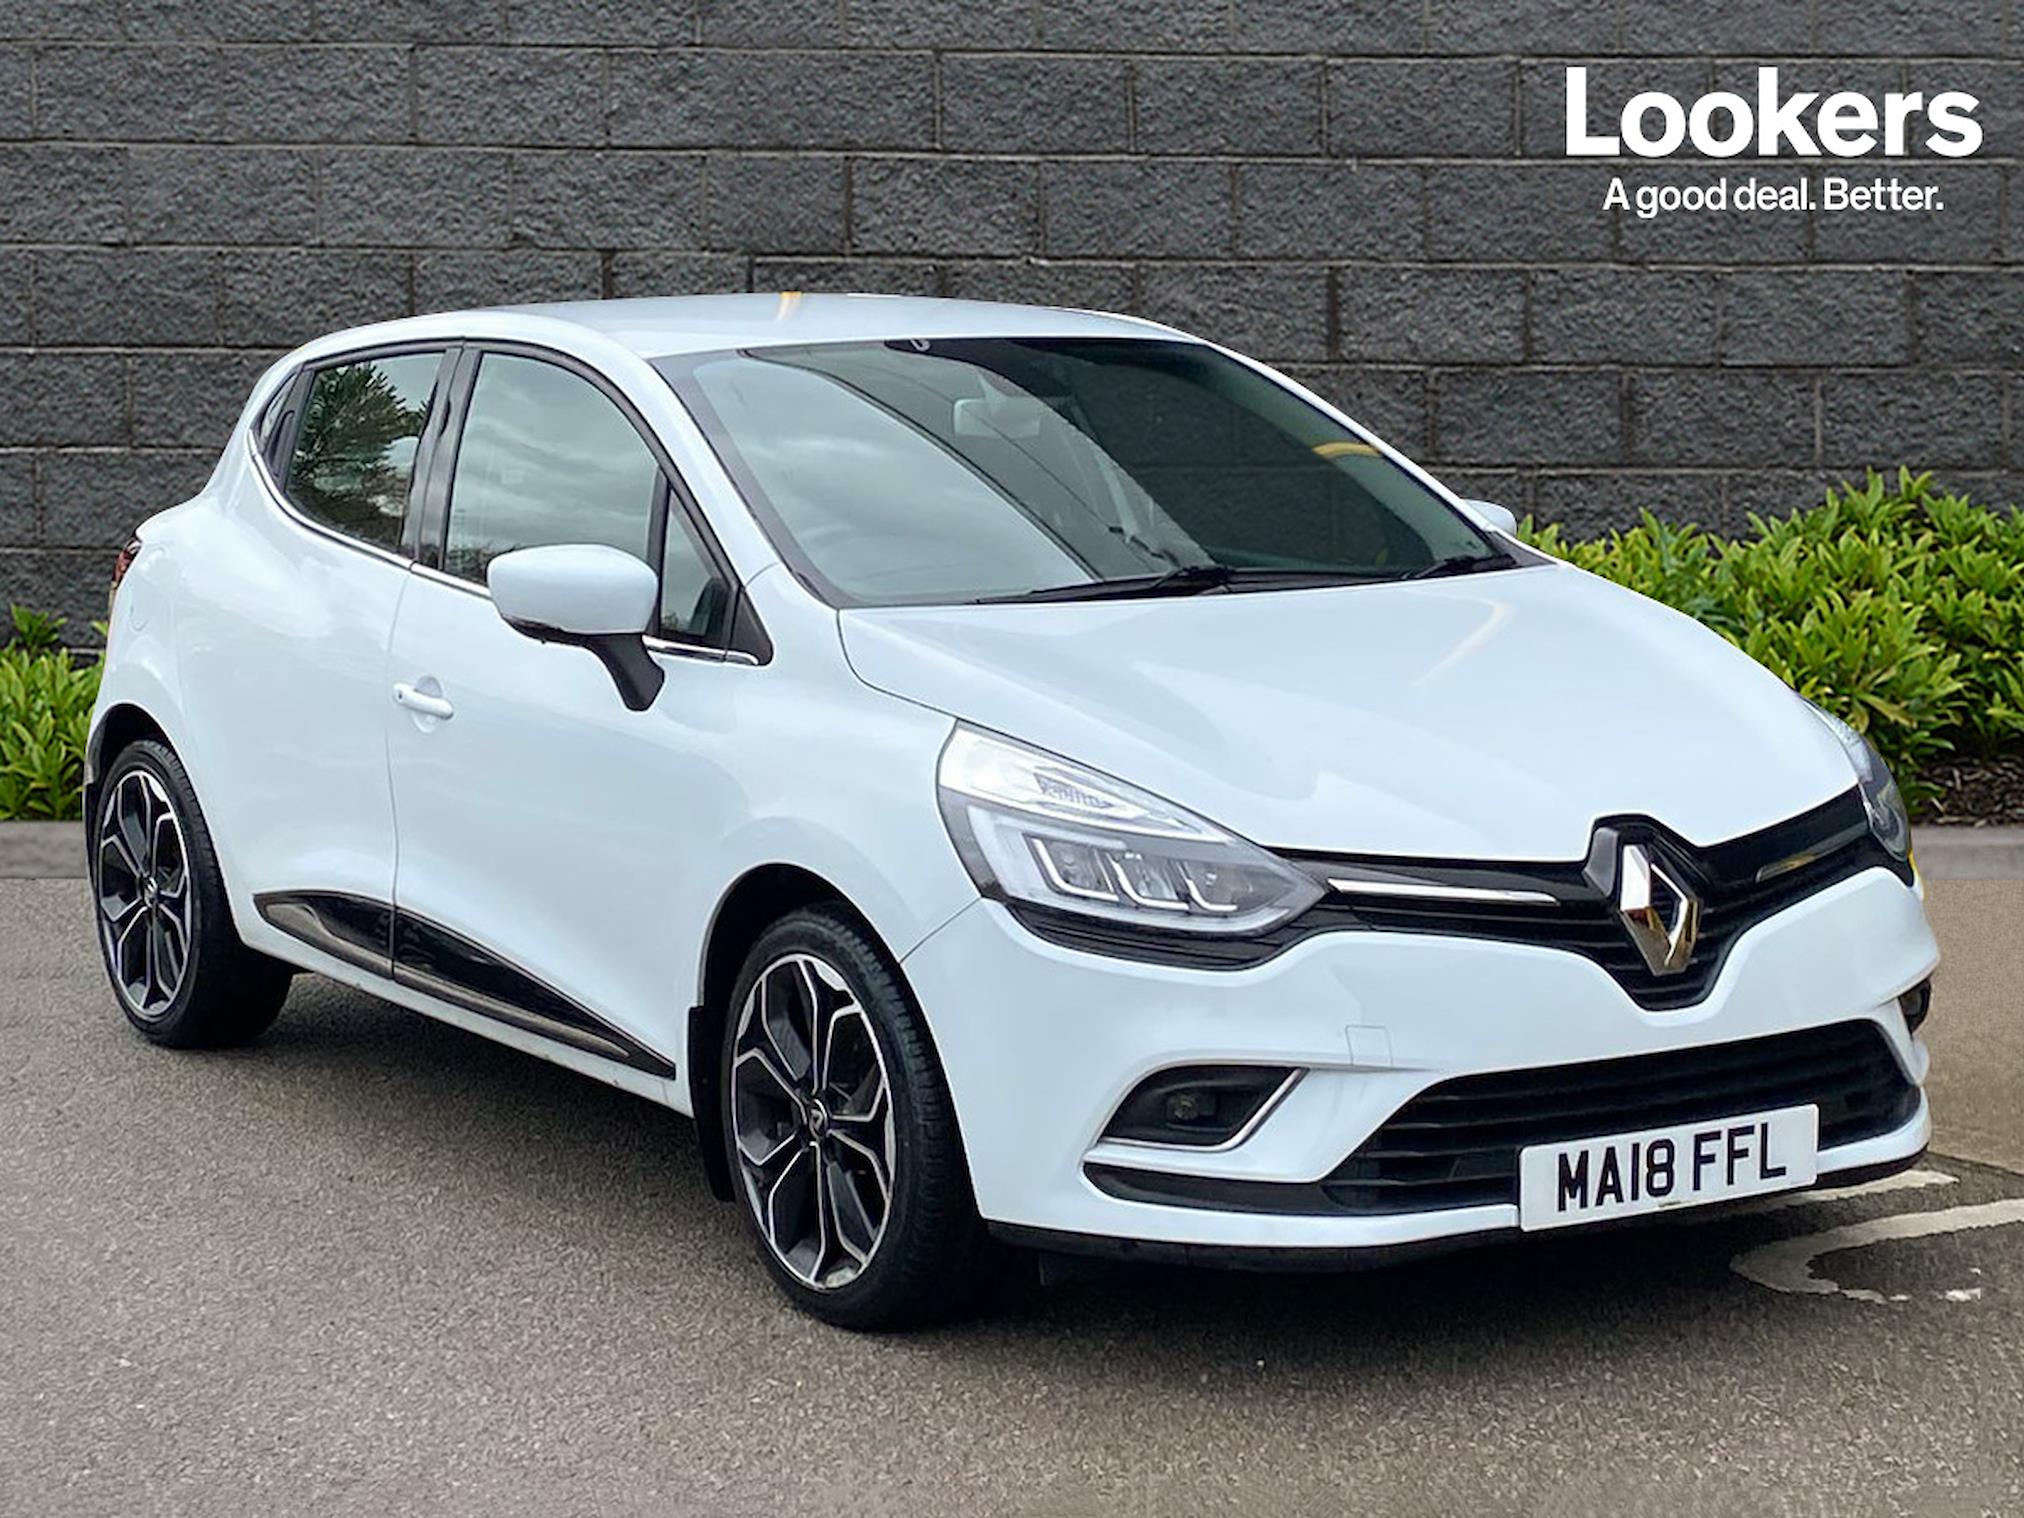 Used RENAULT CLIO 0.9 Tce 90 Dynamique S Nav 5Dr 2018